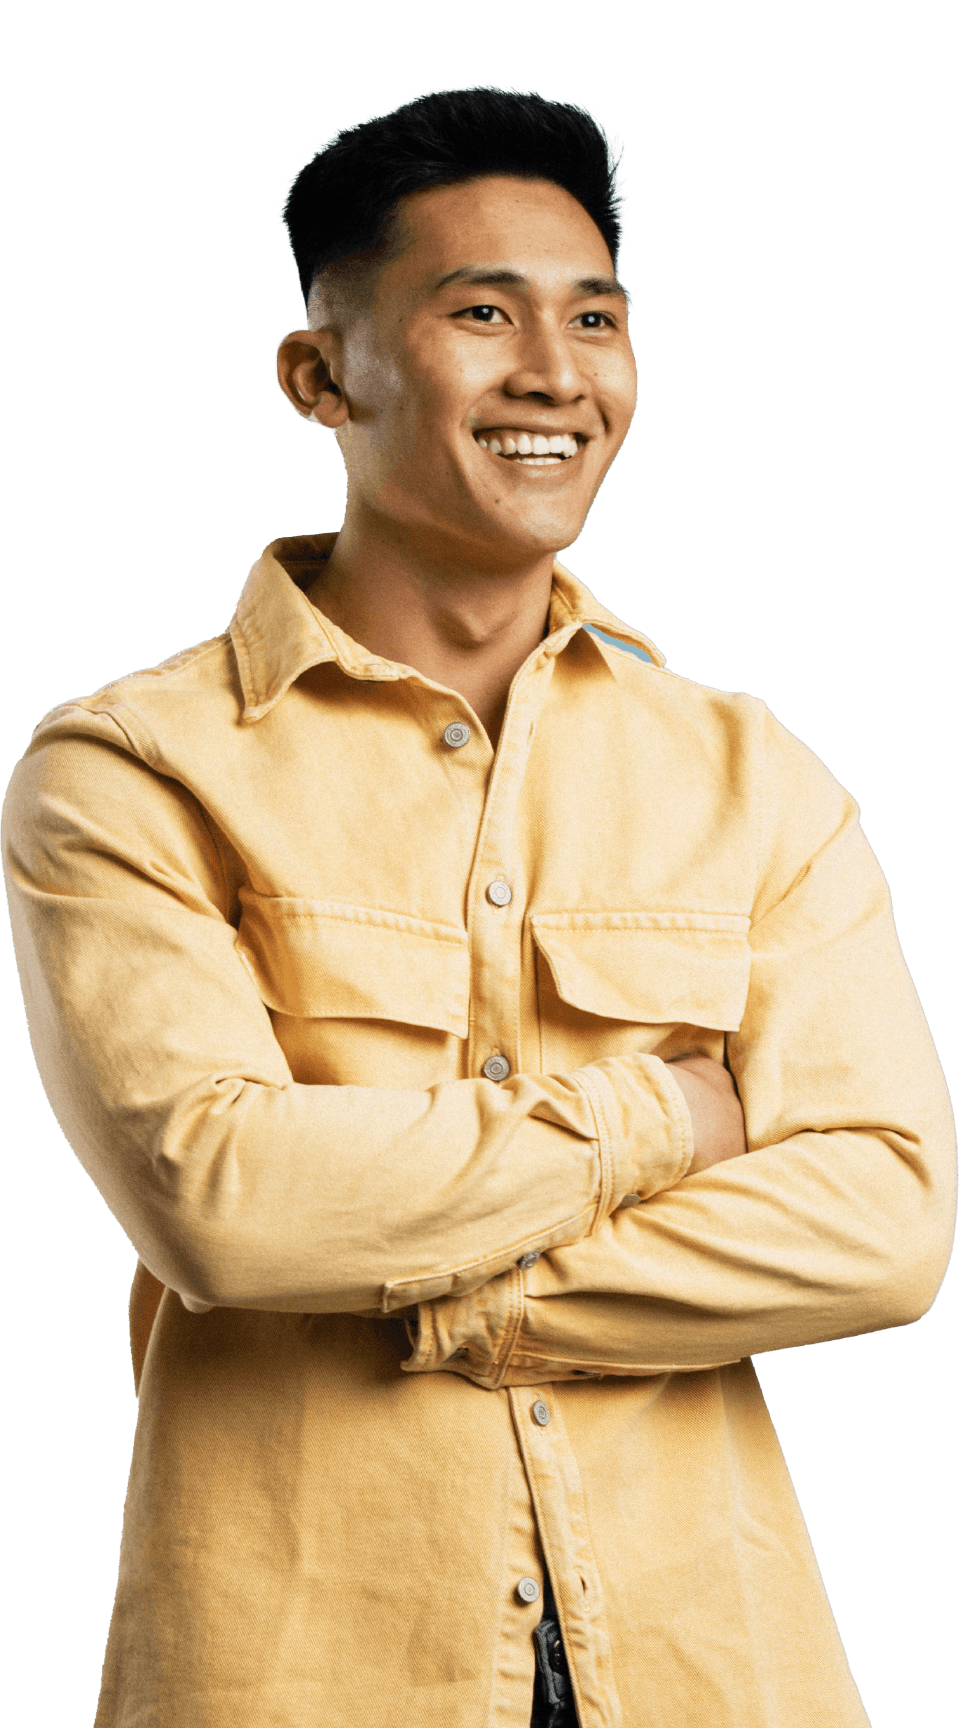 An Asian man in a yellow shirt smiles with his arms crossed.